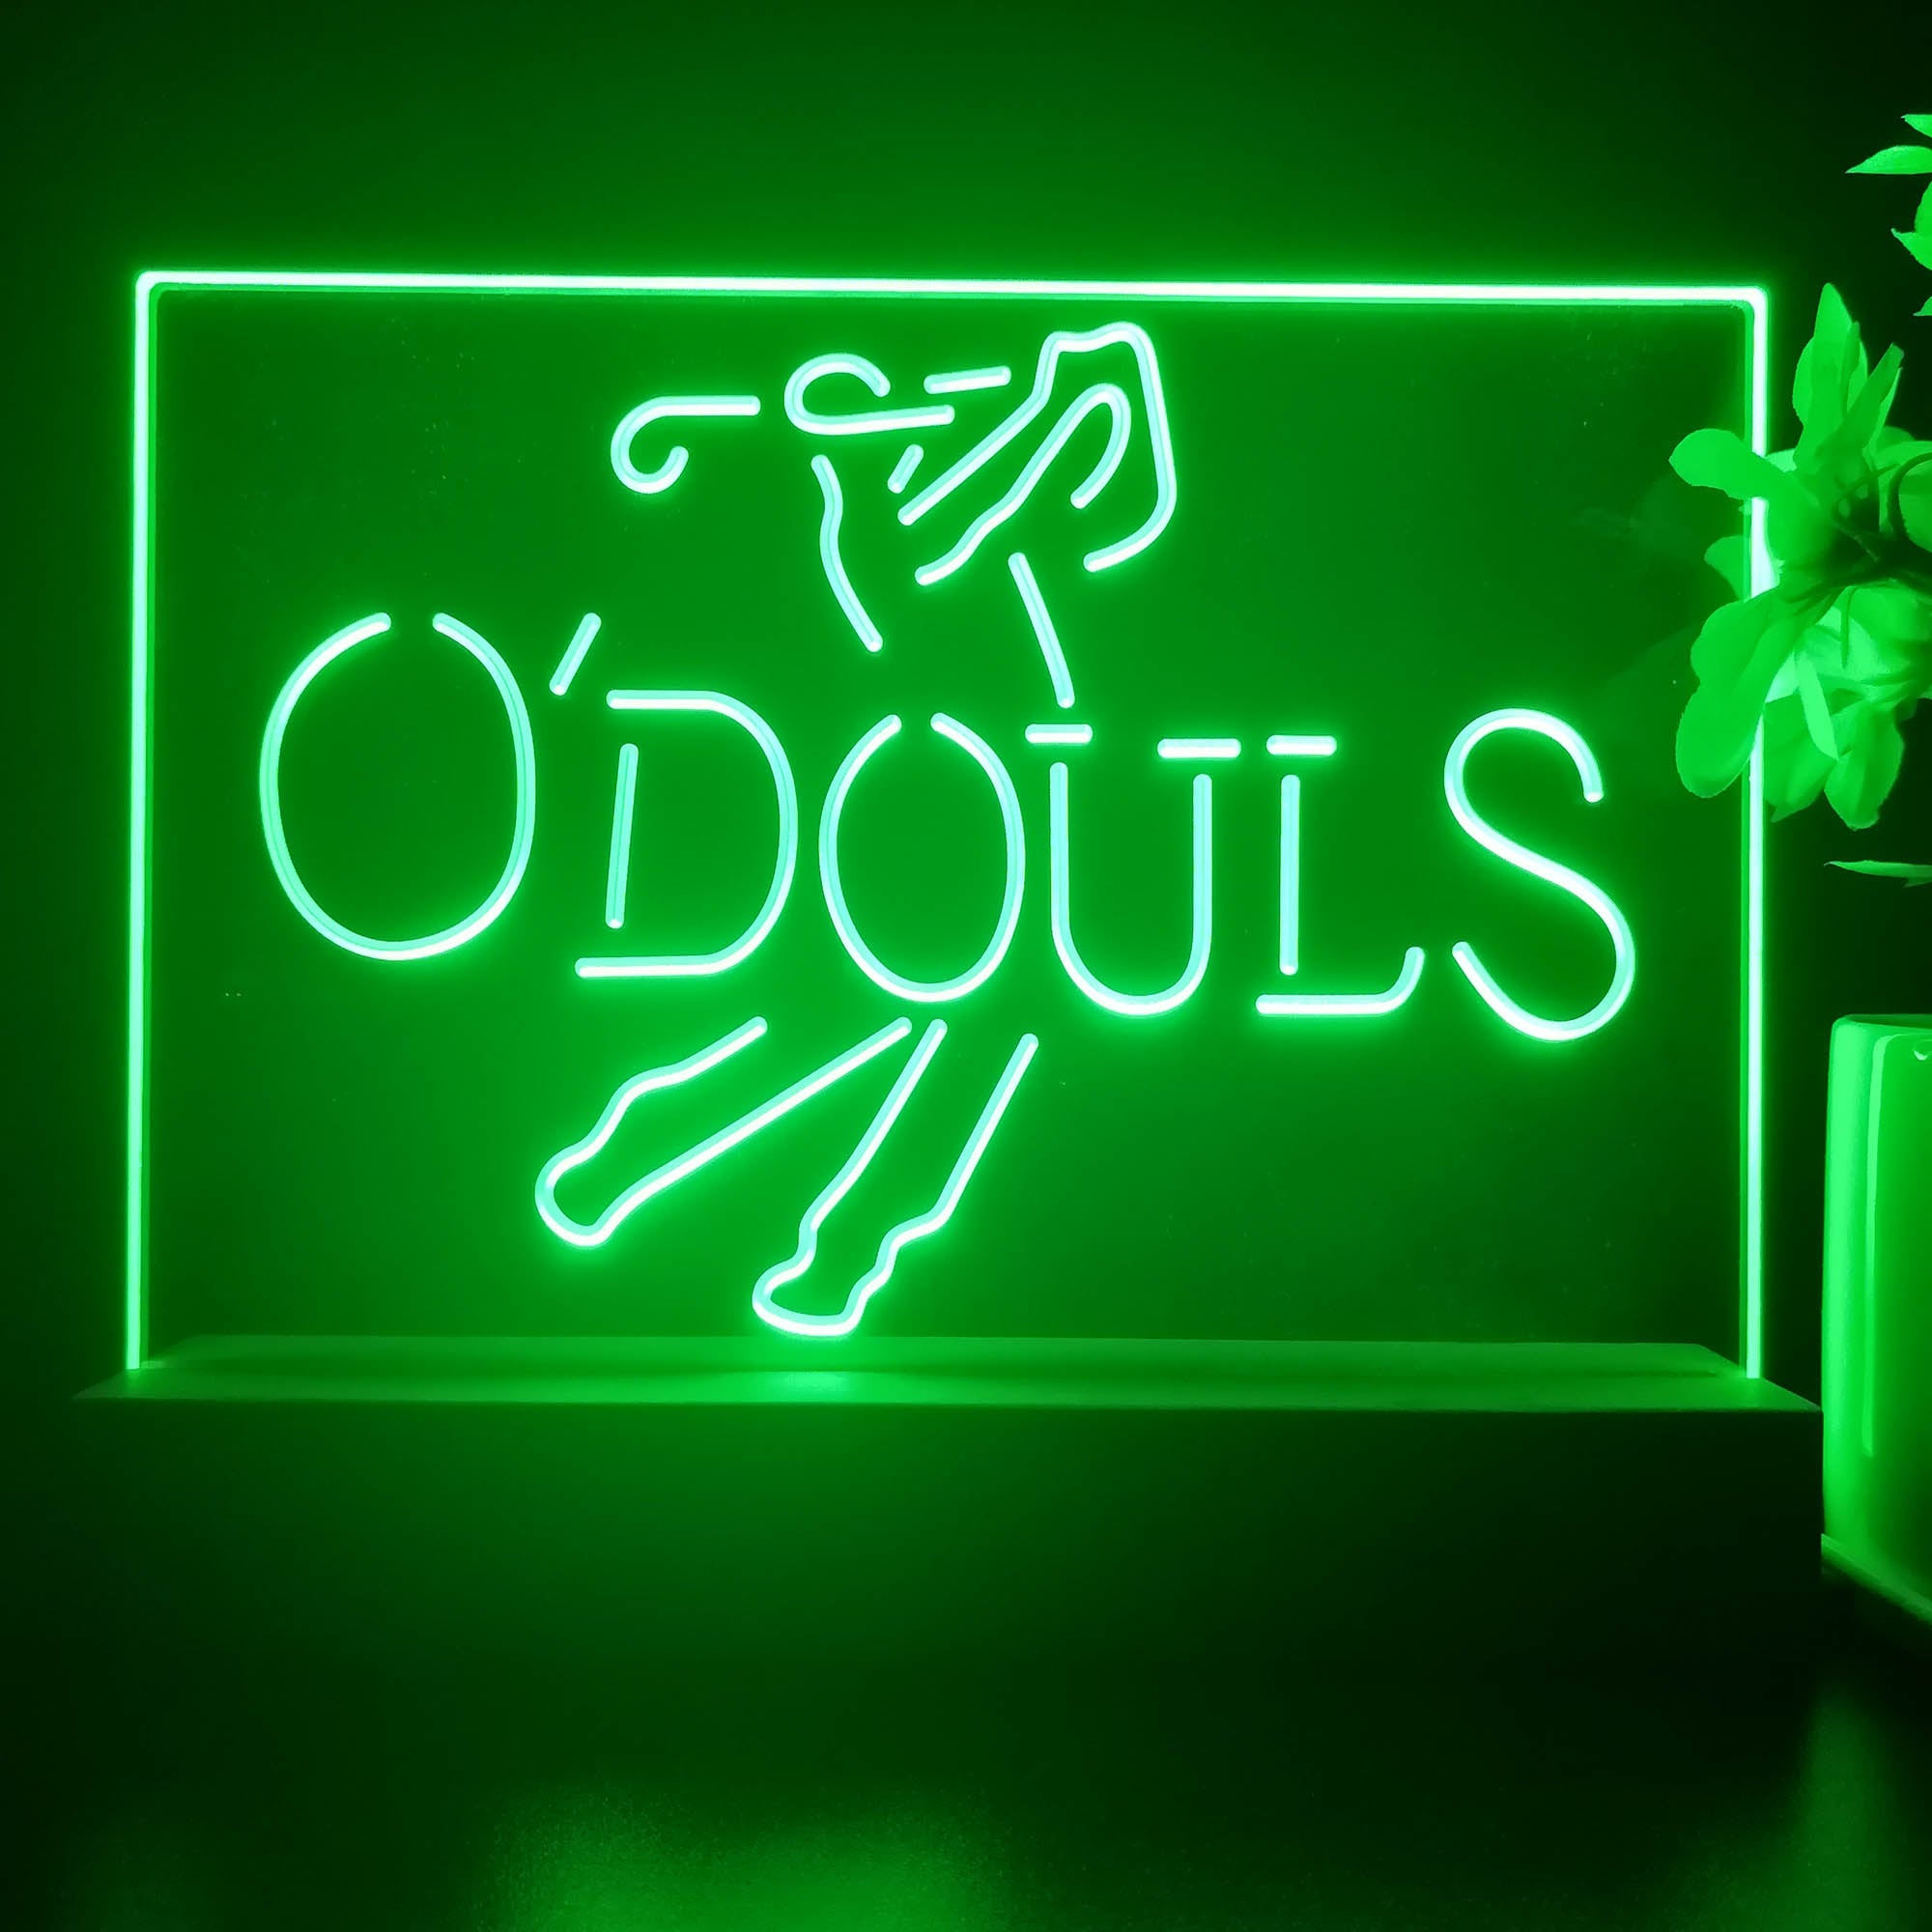 O'Doul's Beer Golfer Neon Sign Pub Bar Lamp